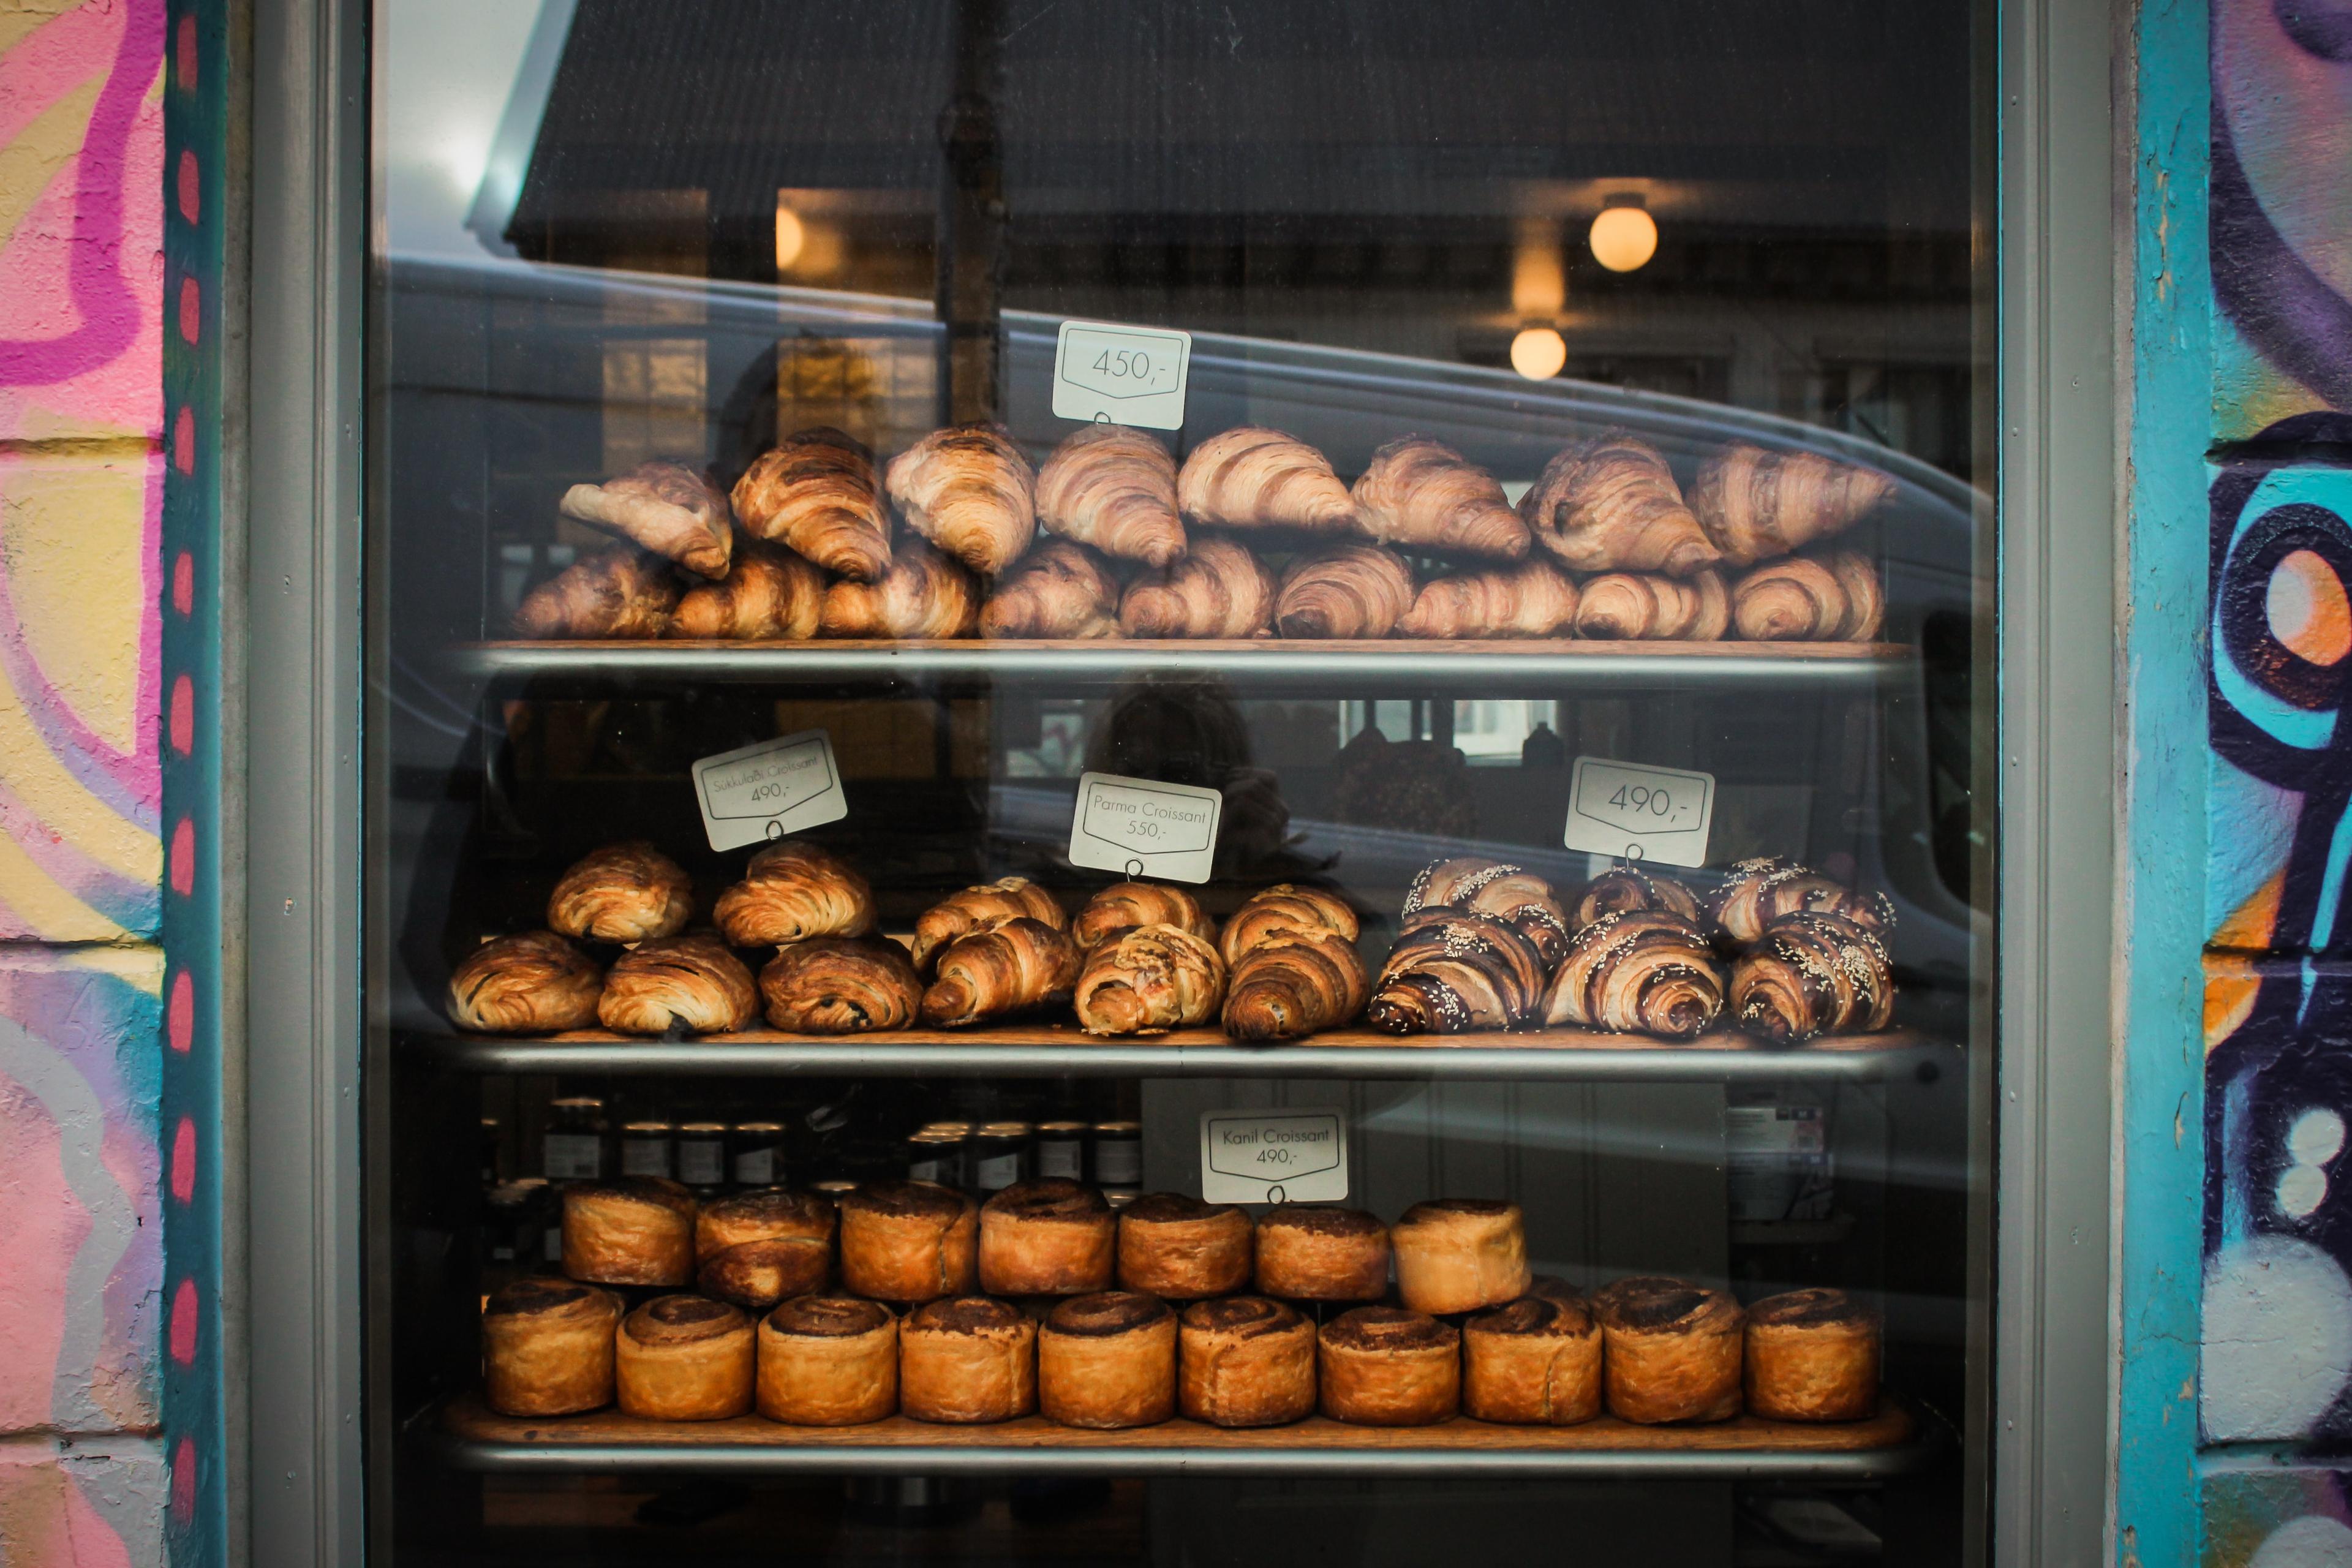 "Assortment of pastries displayed in a store window, set against the backdrop of graffiti-covered walls.